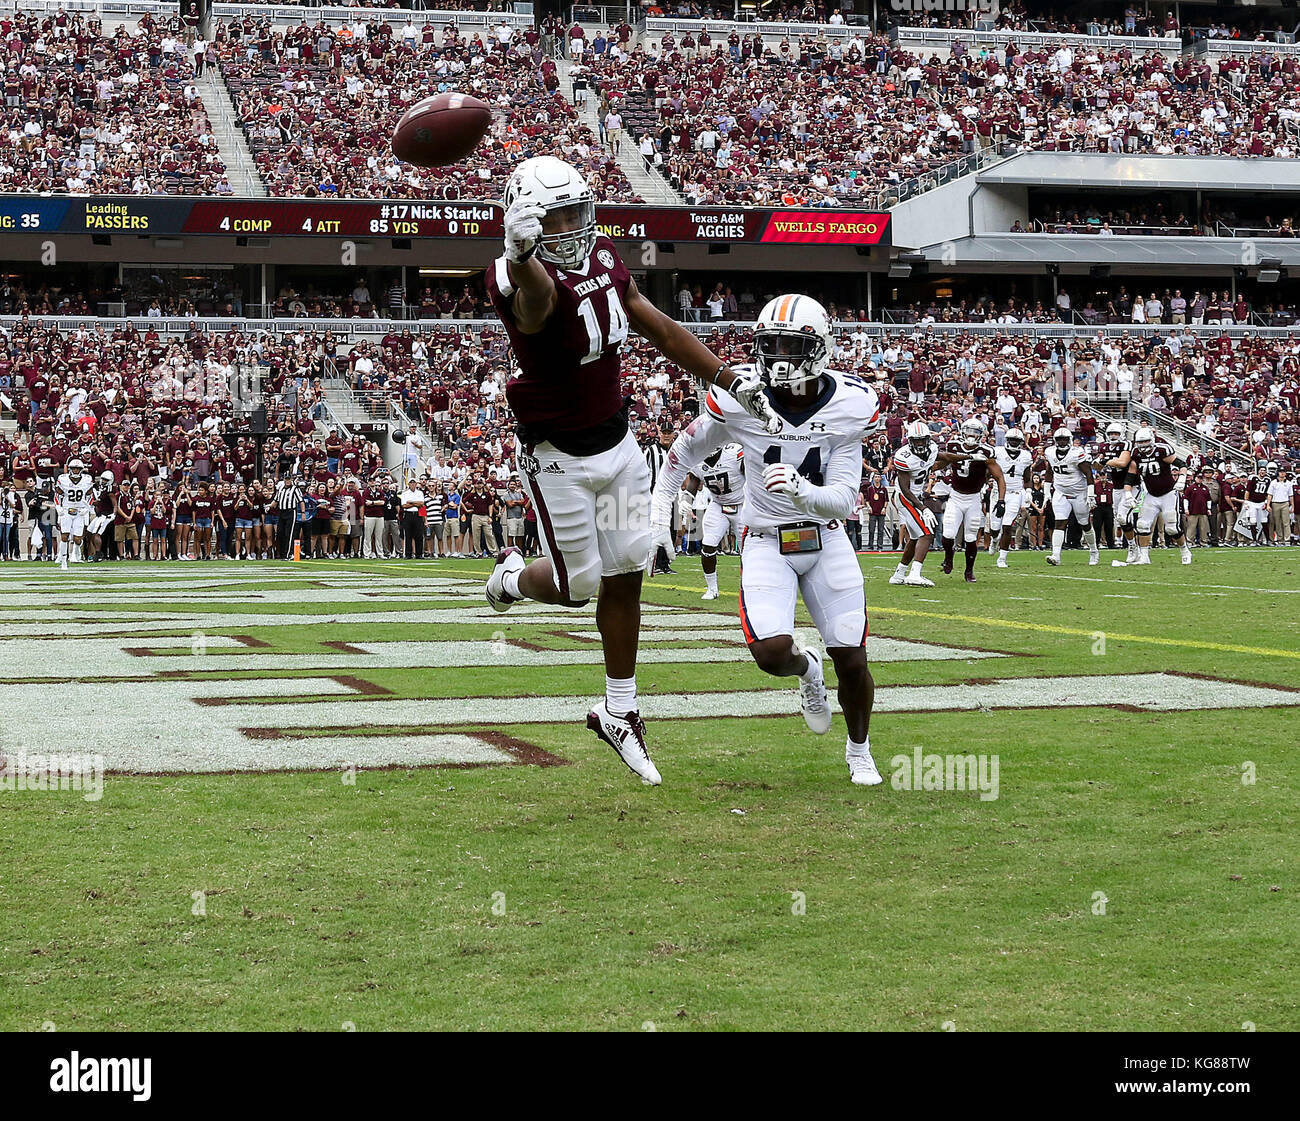 November 4, 2017: Texas A&M Aggies wide receiver Camron Buckley (14) reaches for a pass that sails over his head in the second quarter during the NCAA football game between the Auburn Tigers and the Texas A&M Aggies at Kyle Field in College Station, TX; John Glaser/CSM. Stock Photo